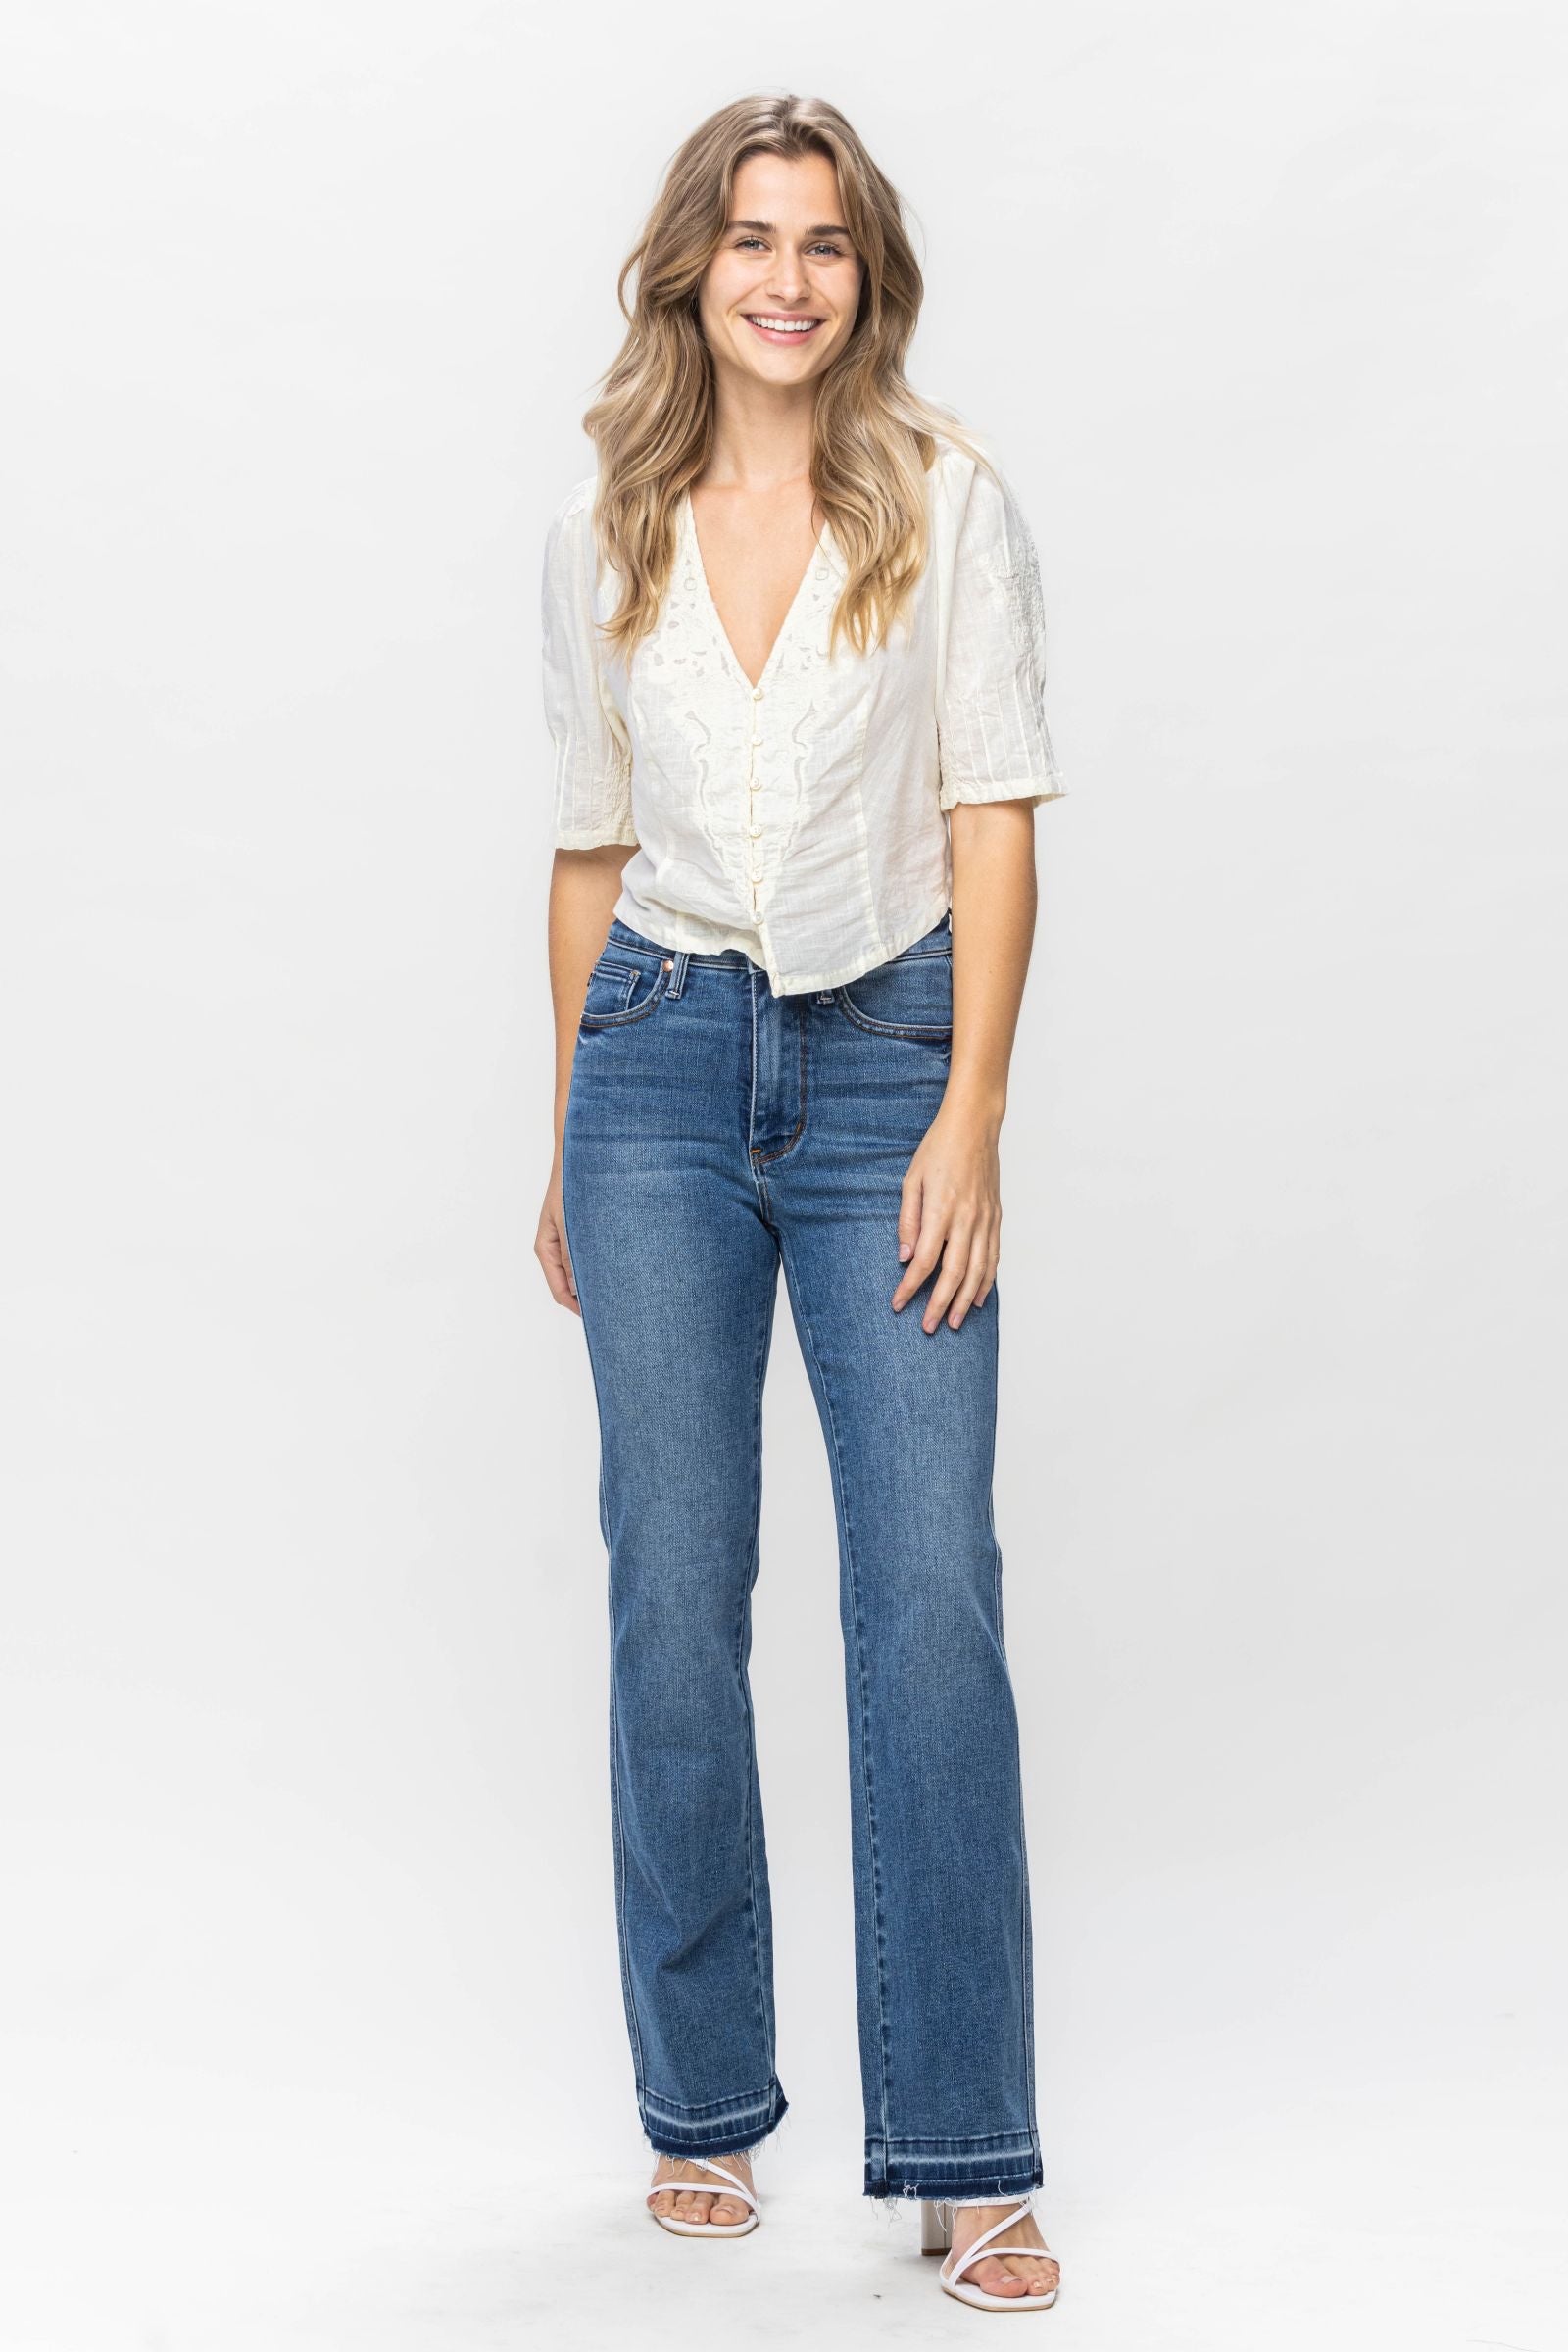 JUDY BLUE TUMMY CONTROL TOP JEANS